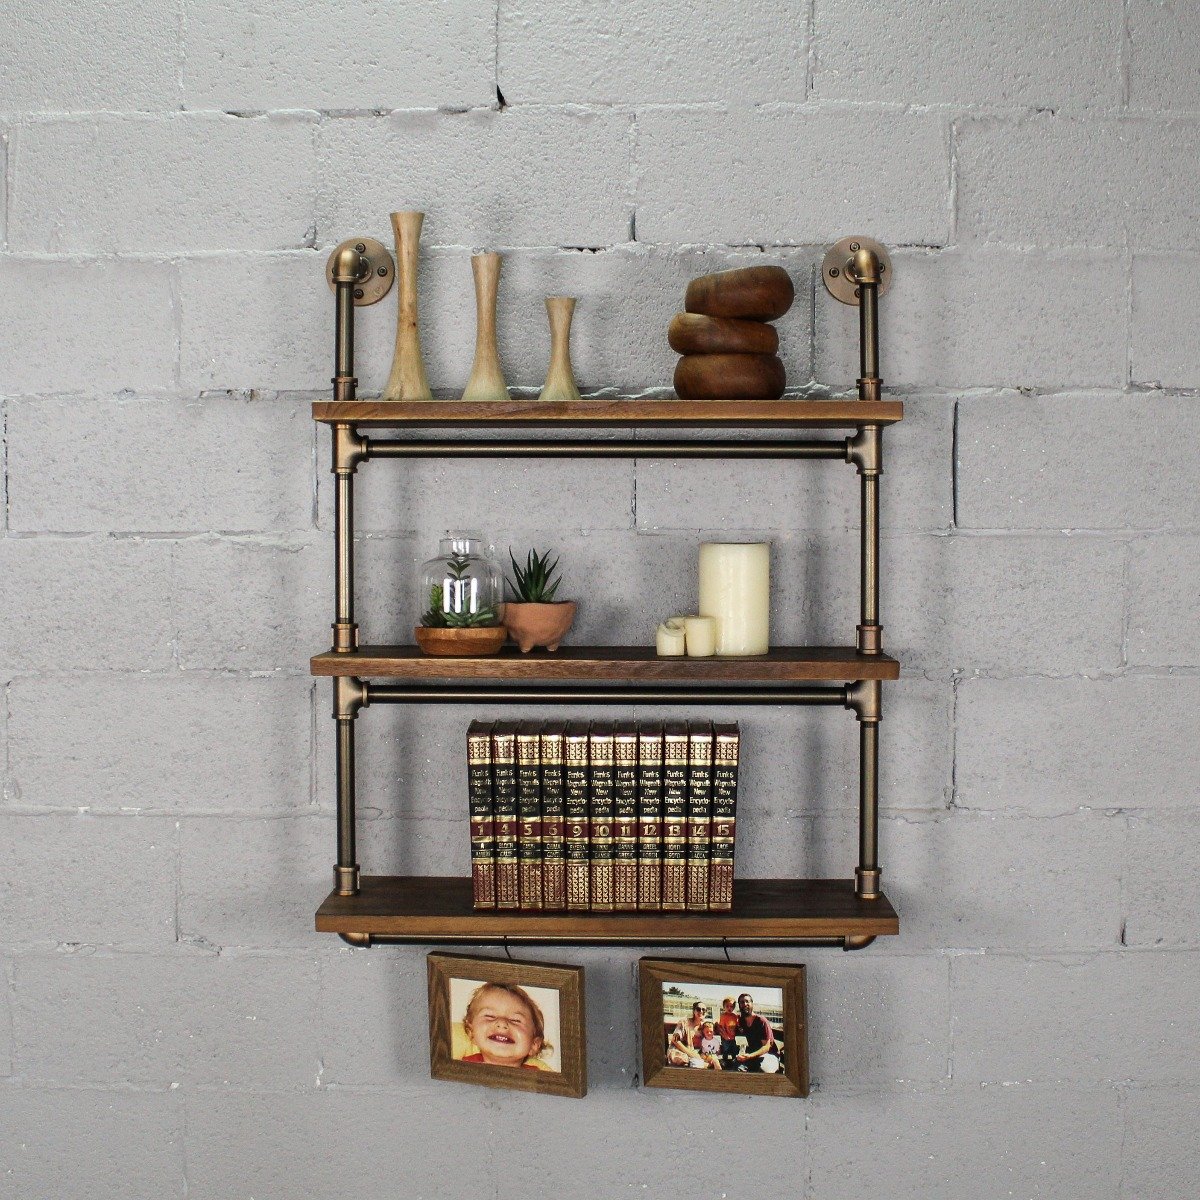 Tts301-bz-bz-br Juneau Industrial Chic 30 Wide 3-tier Wall Mounted Etagere Bookcase, Rustic Bronze Combo With Light Brown Stained Wood